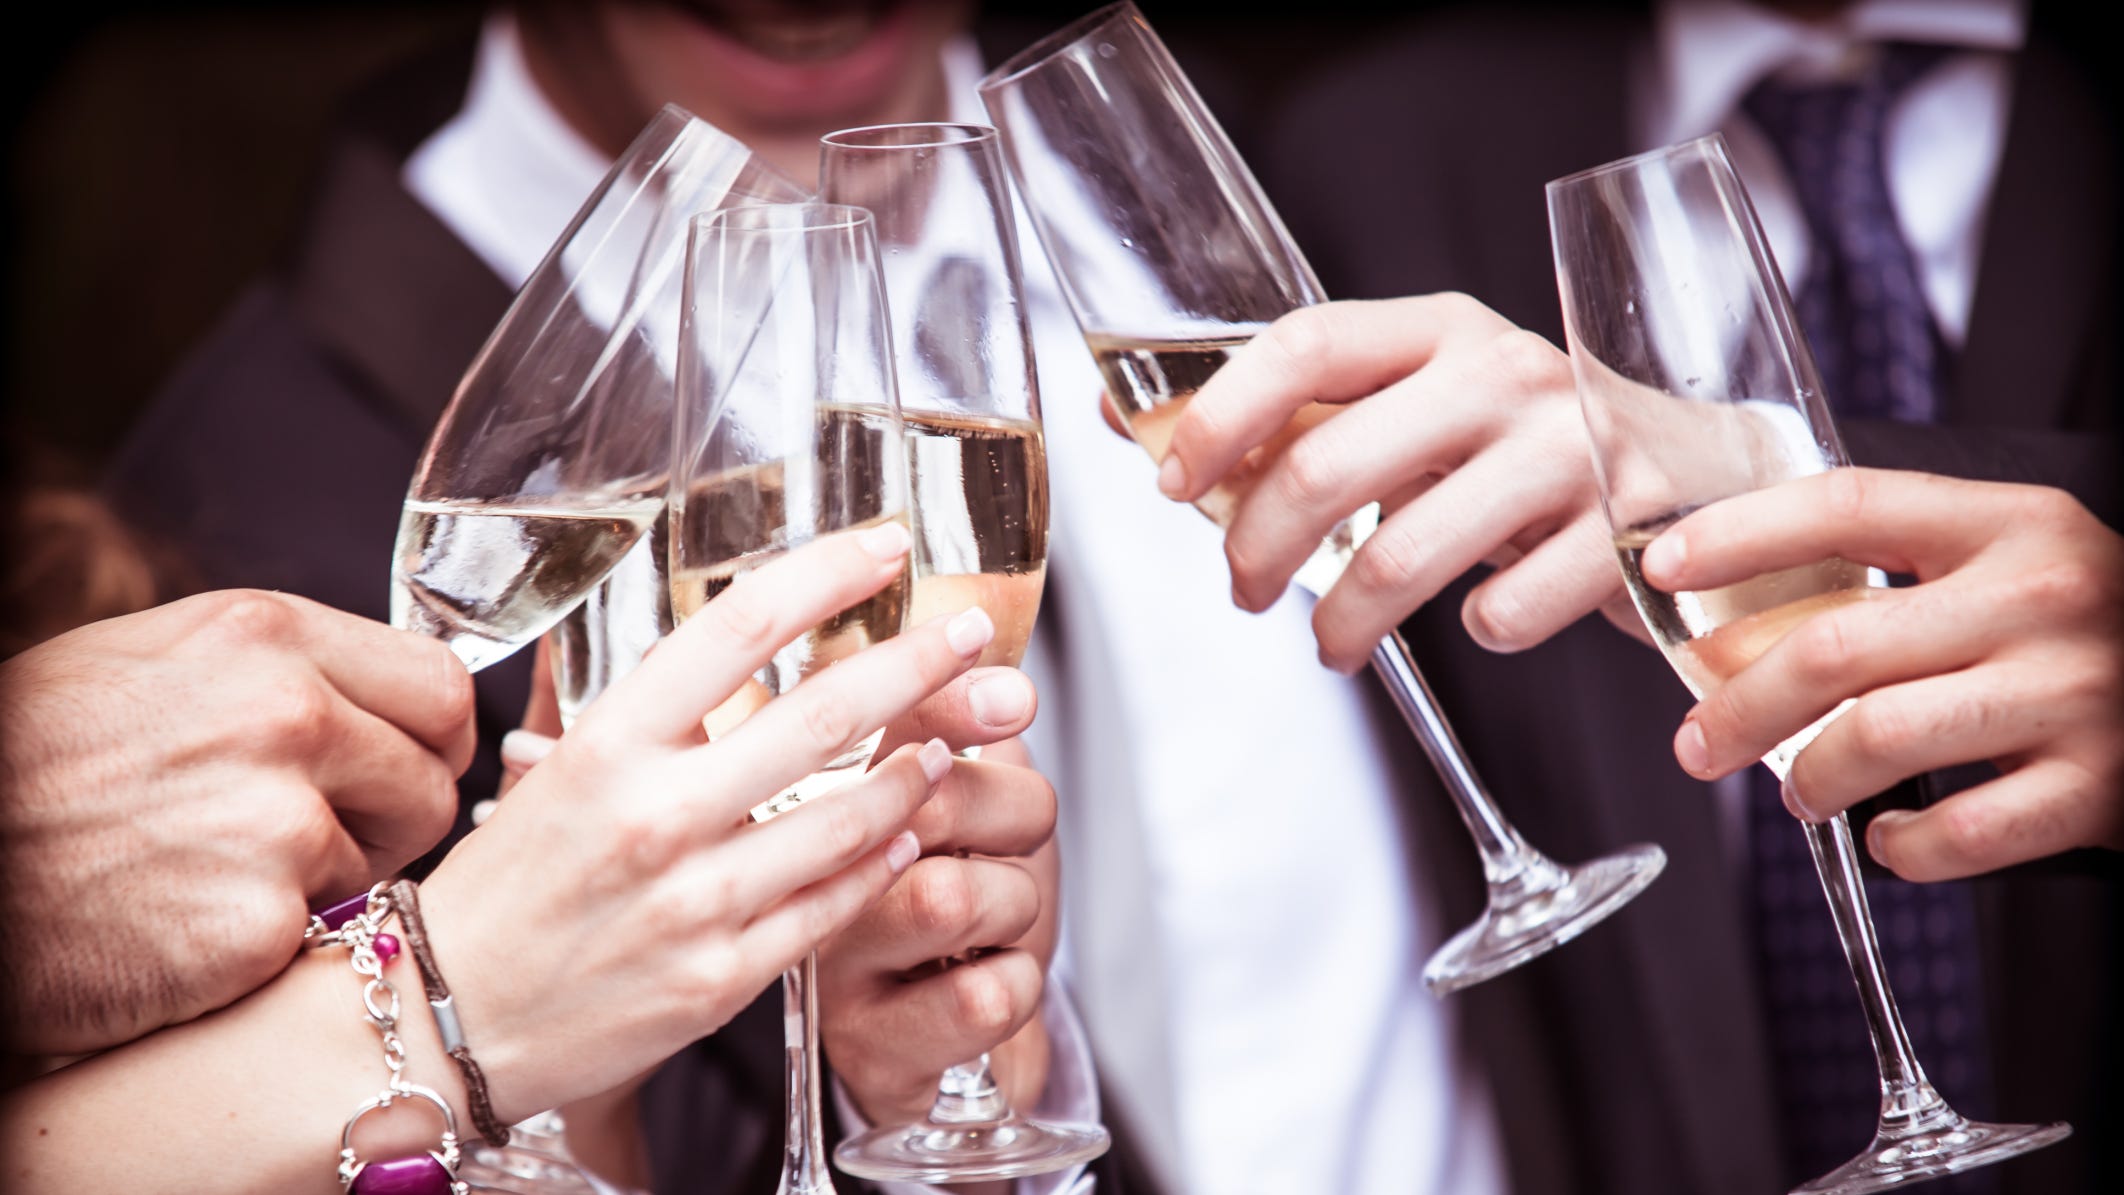 A champagne toast can still take place at a wedding if the COVID-19 guidelines are followed.